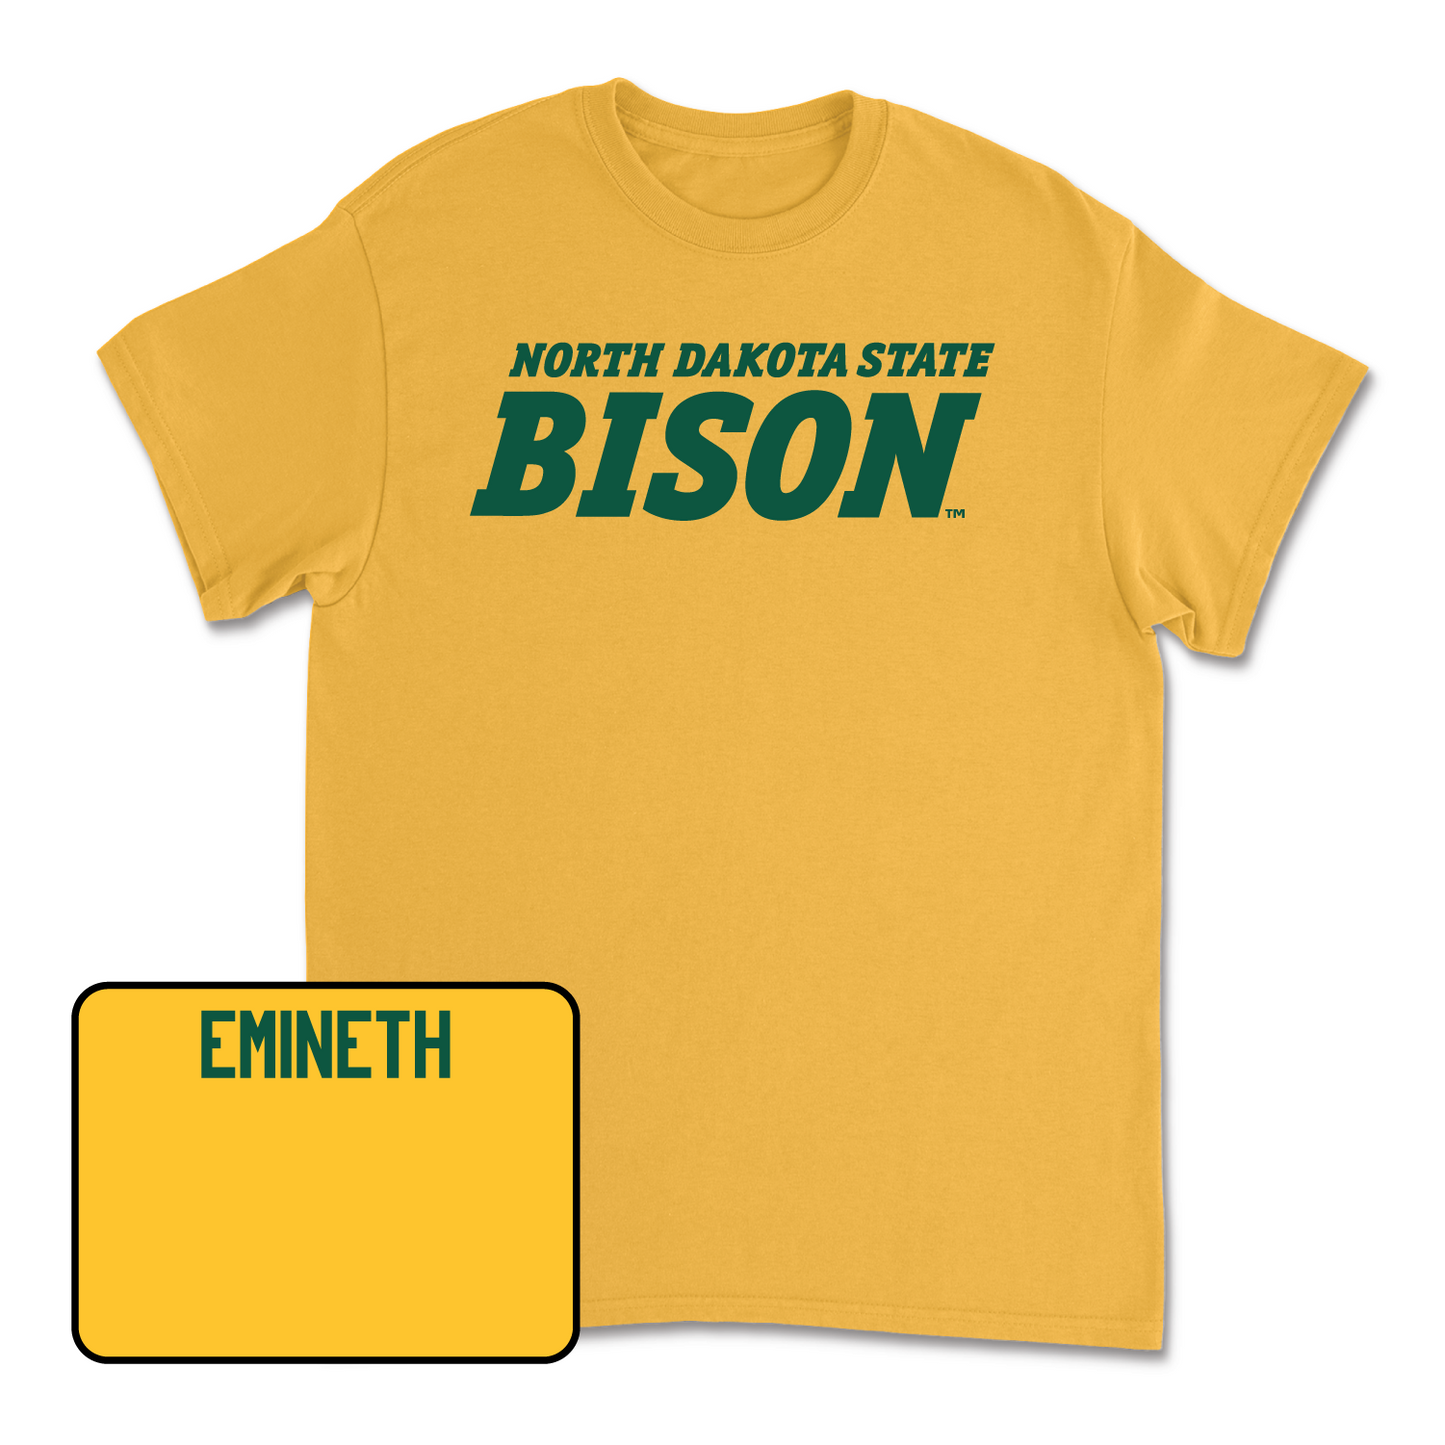 Gold Track & Field Bison Tee Youth Medium / Grace Emineth